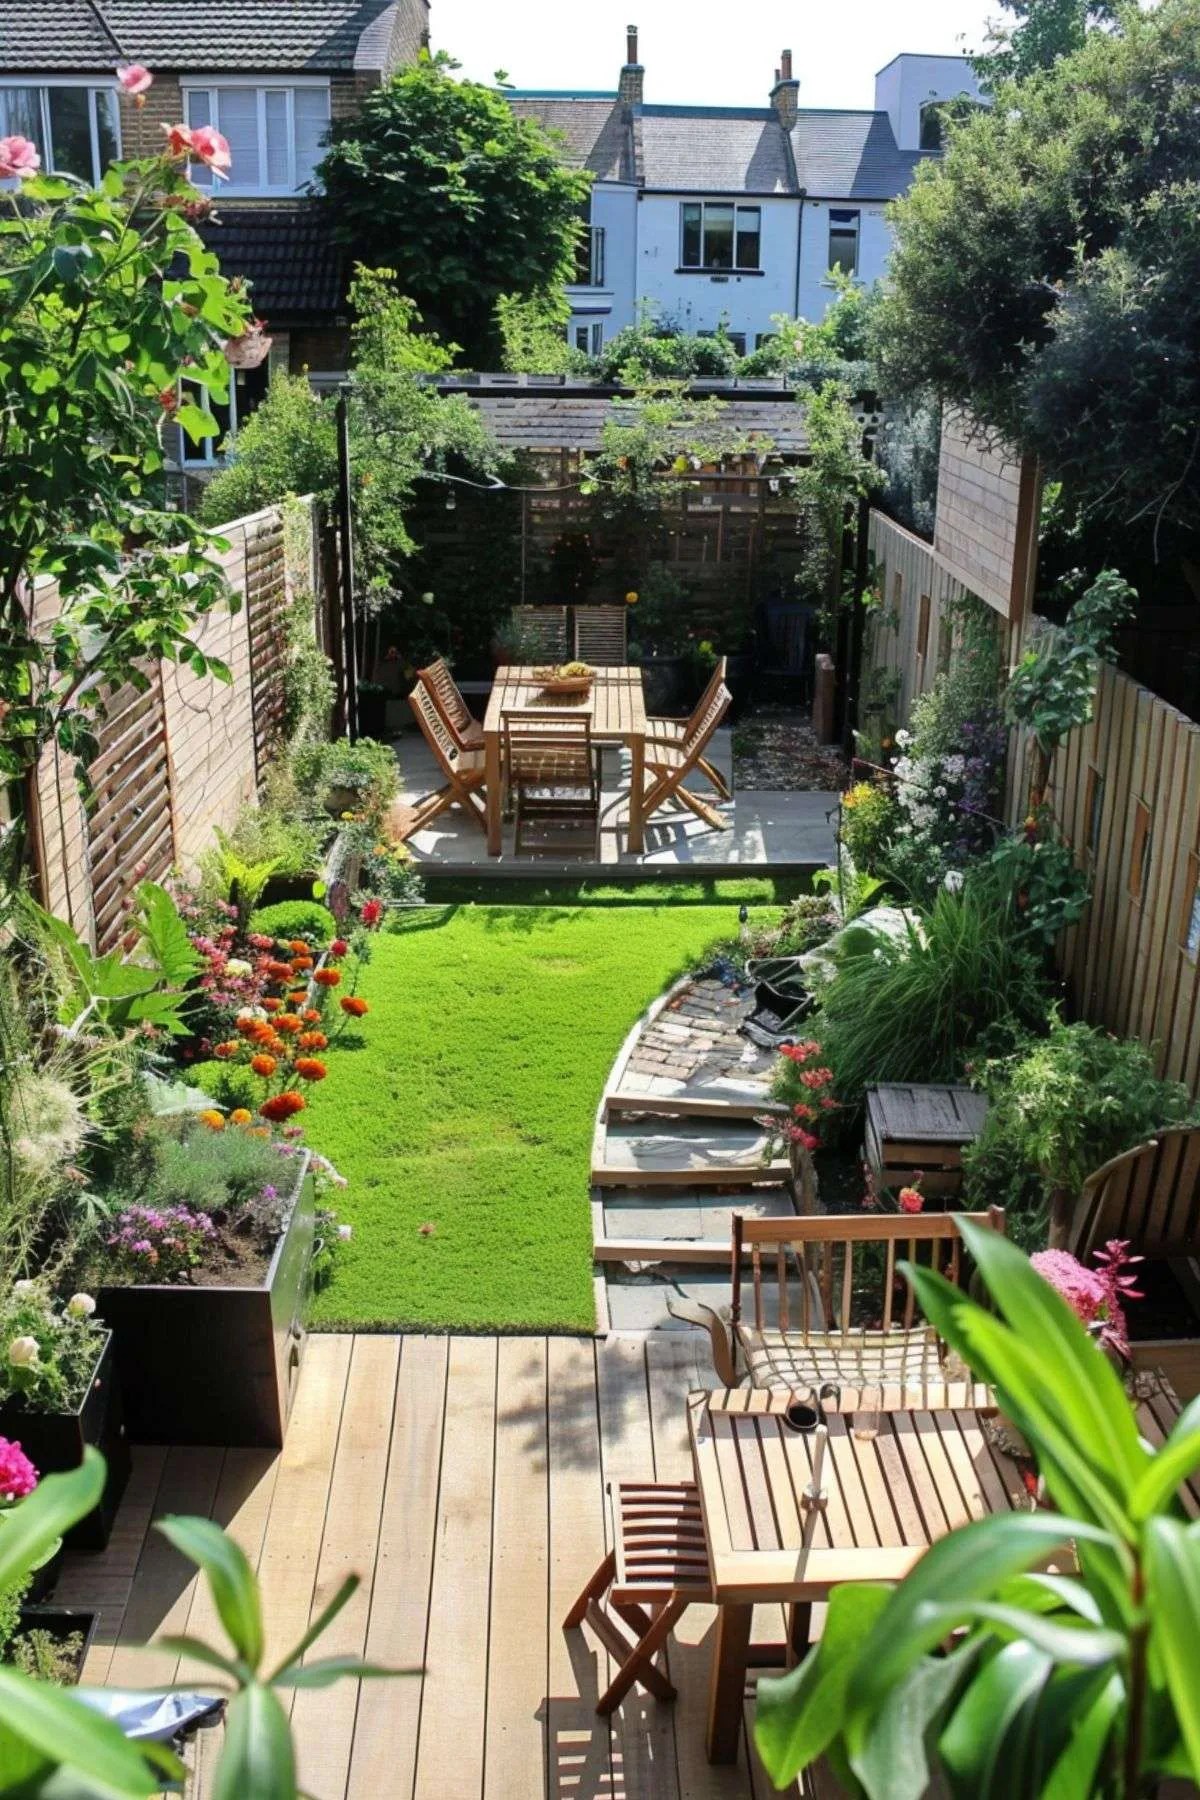 19 Very Small Garden Ideas On a Budget – How to Create a Pocket-Sized Paradise